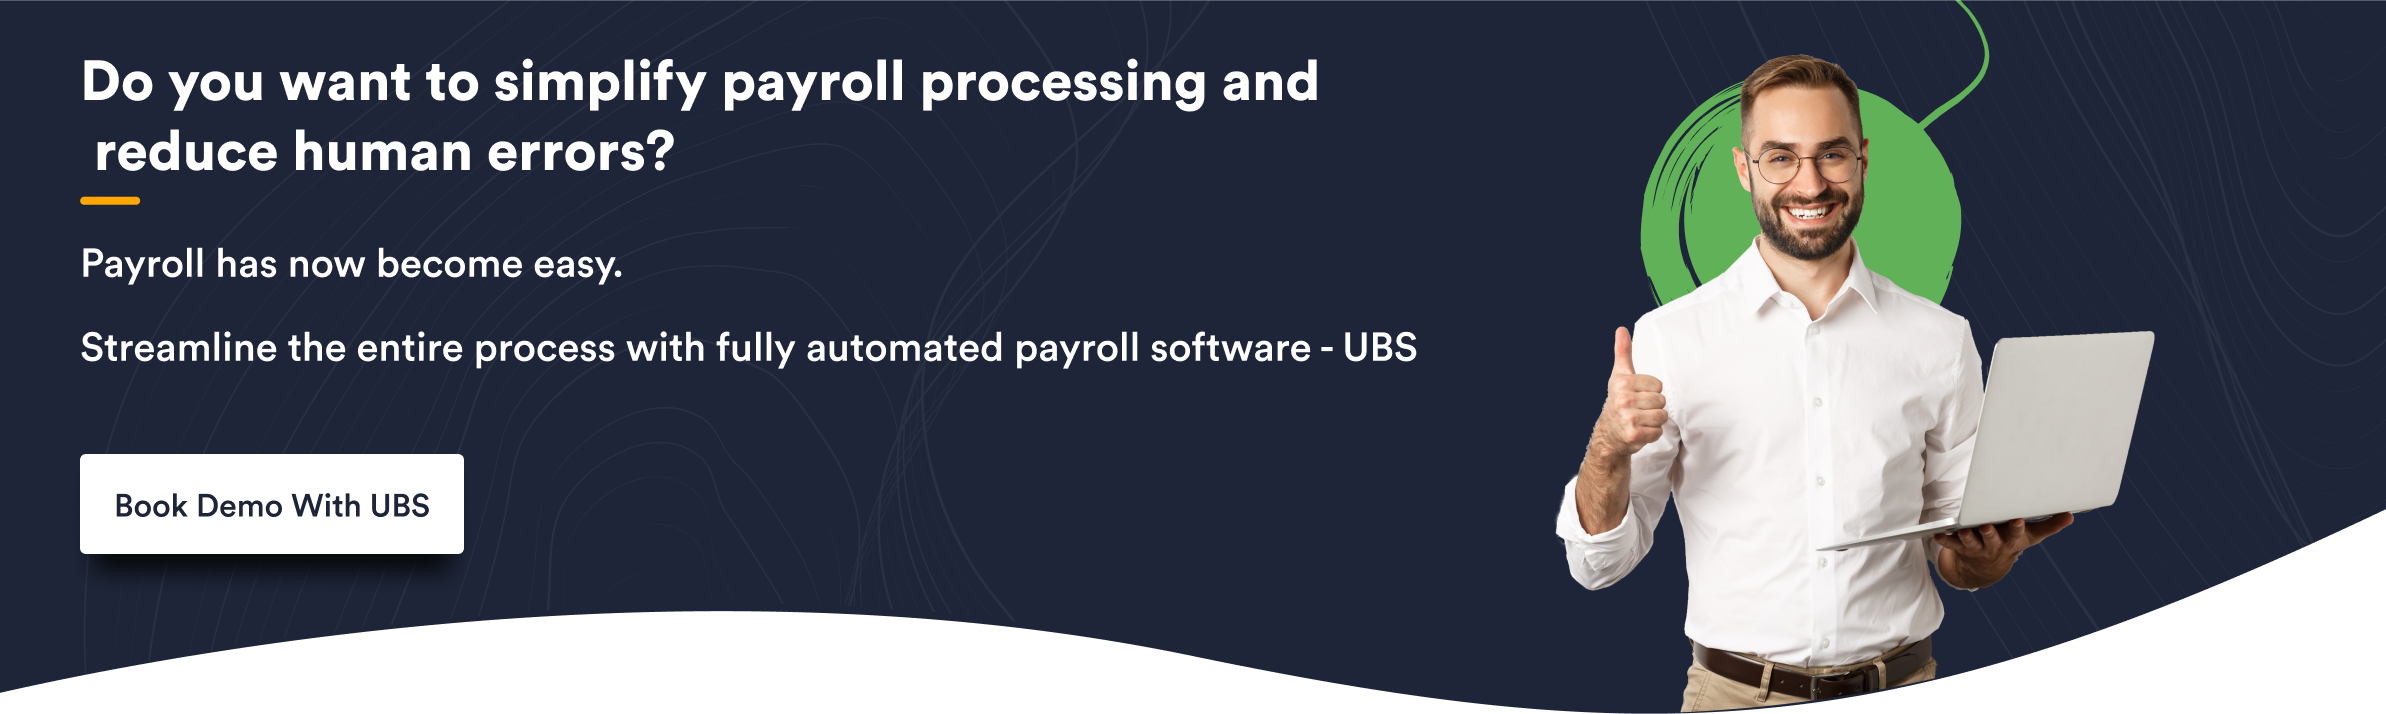 Do you want to simplify payroll processing and reduce human errors